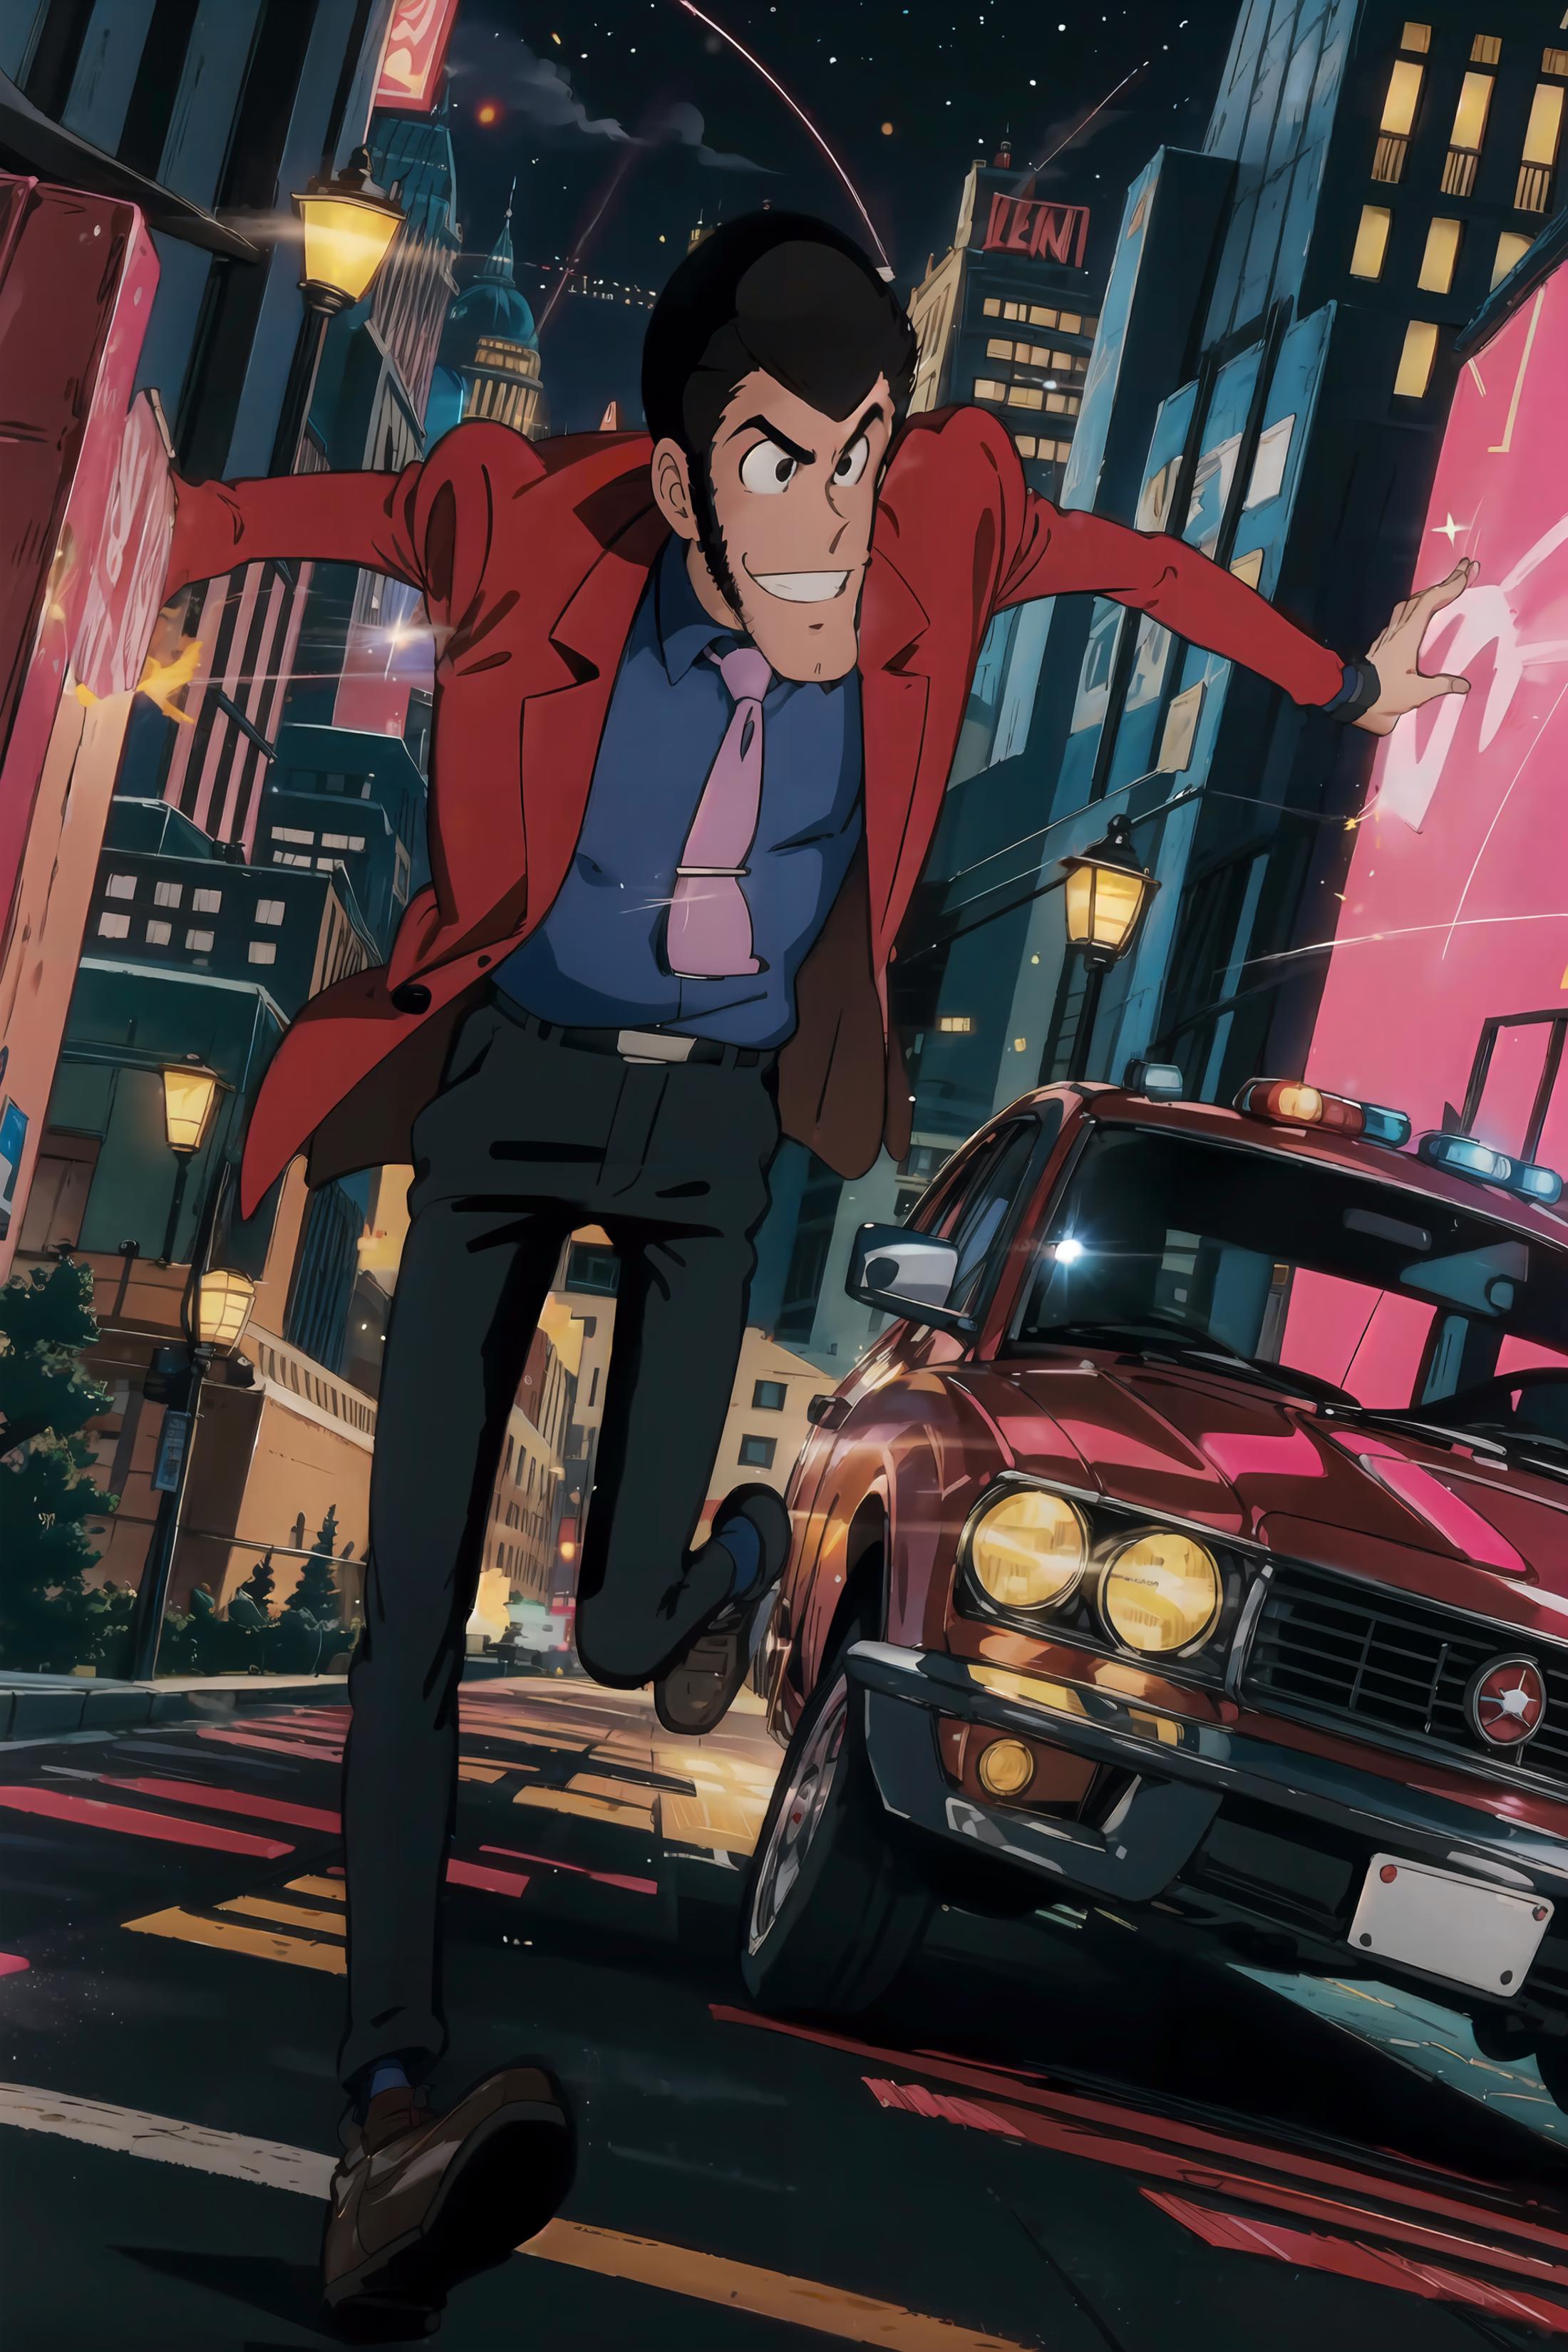 Lupin the Third - Lupin III image by Fenchurch